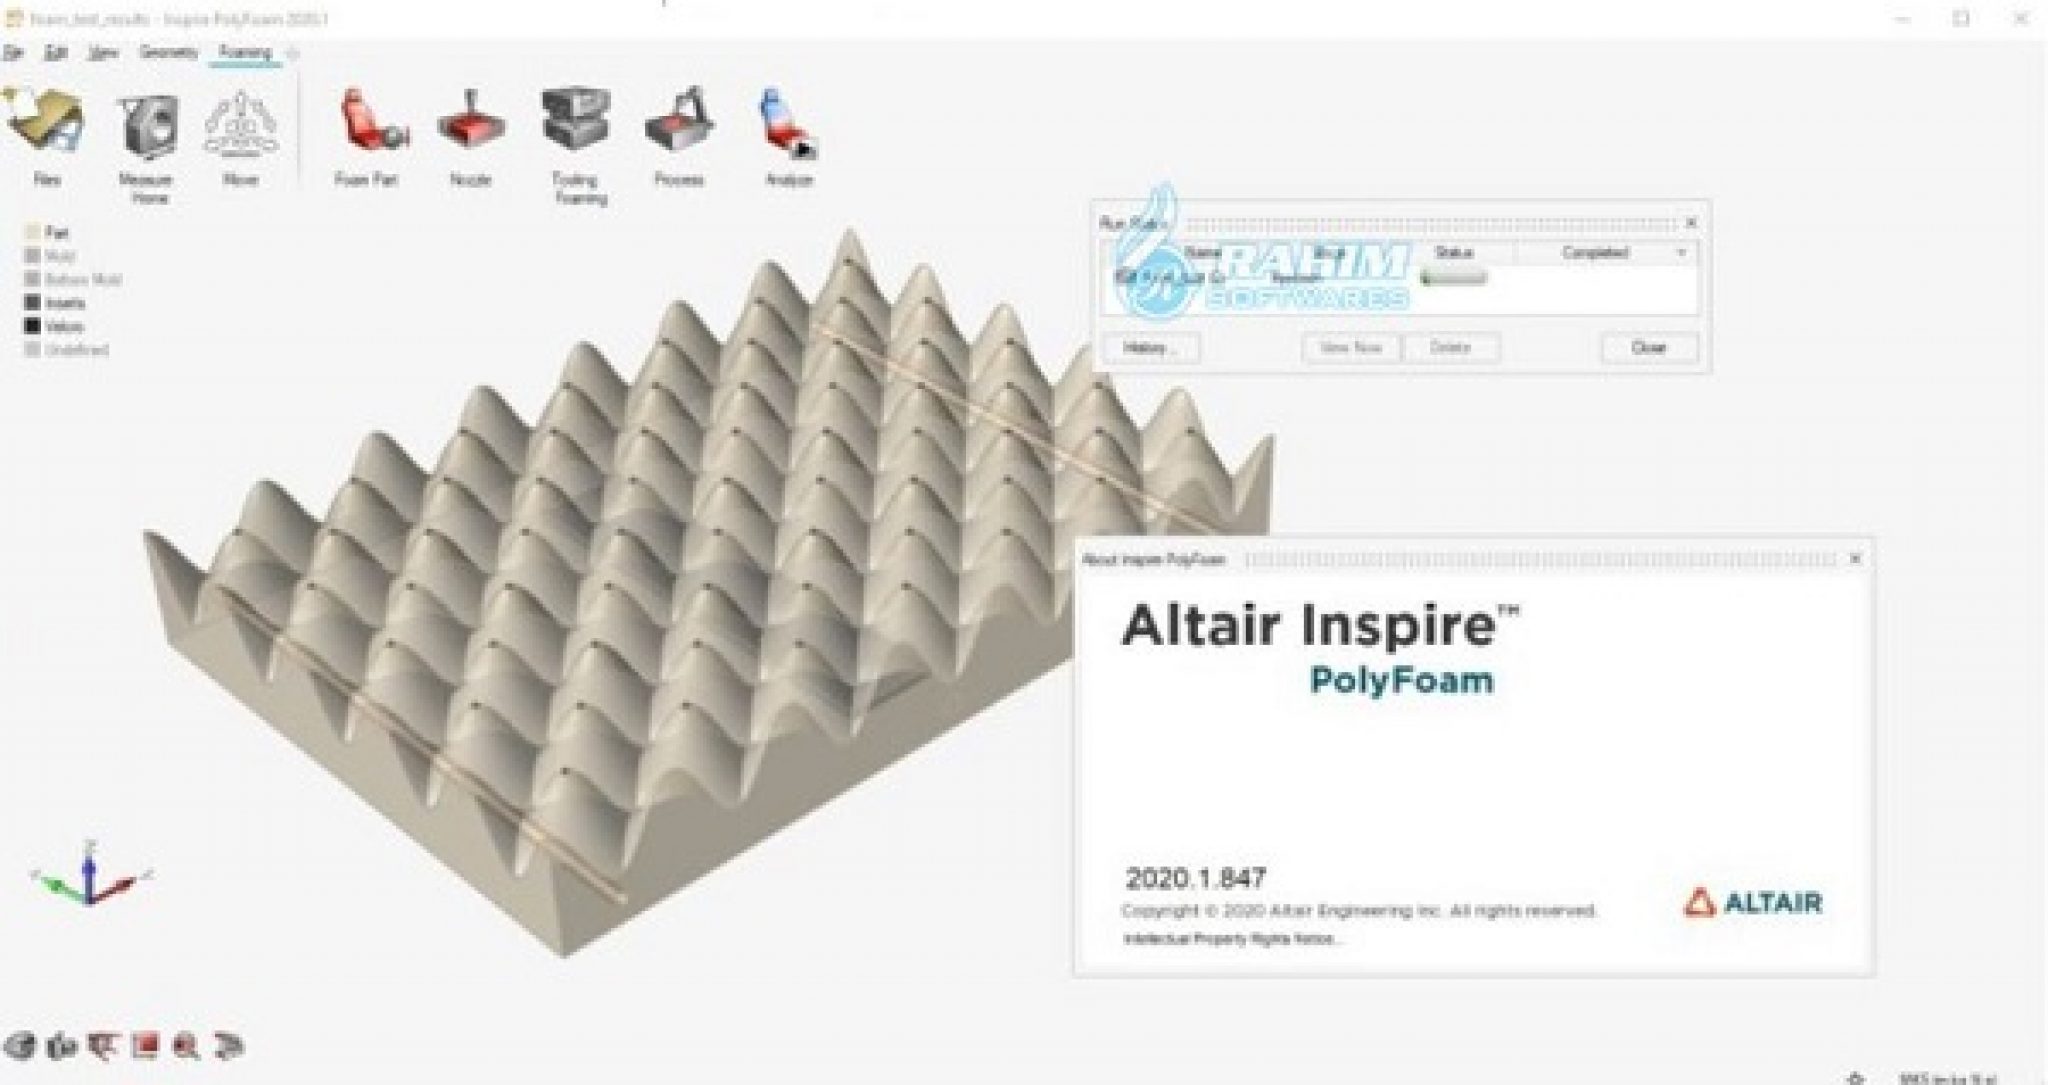 what type of analysis can you do with altair inspire